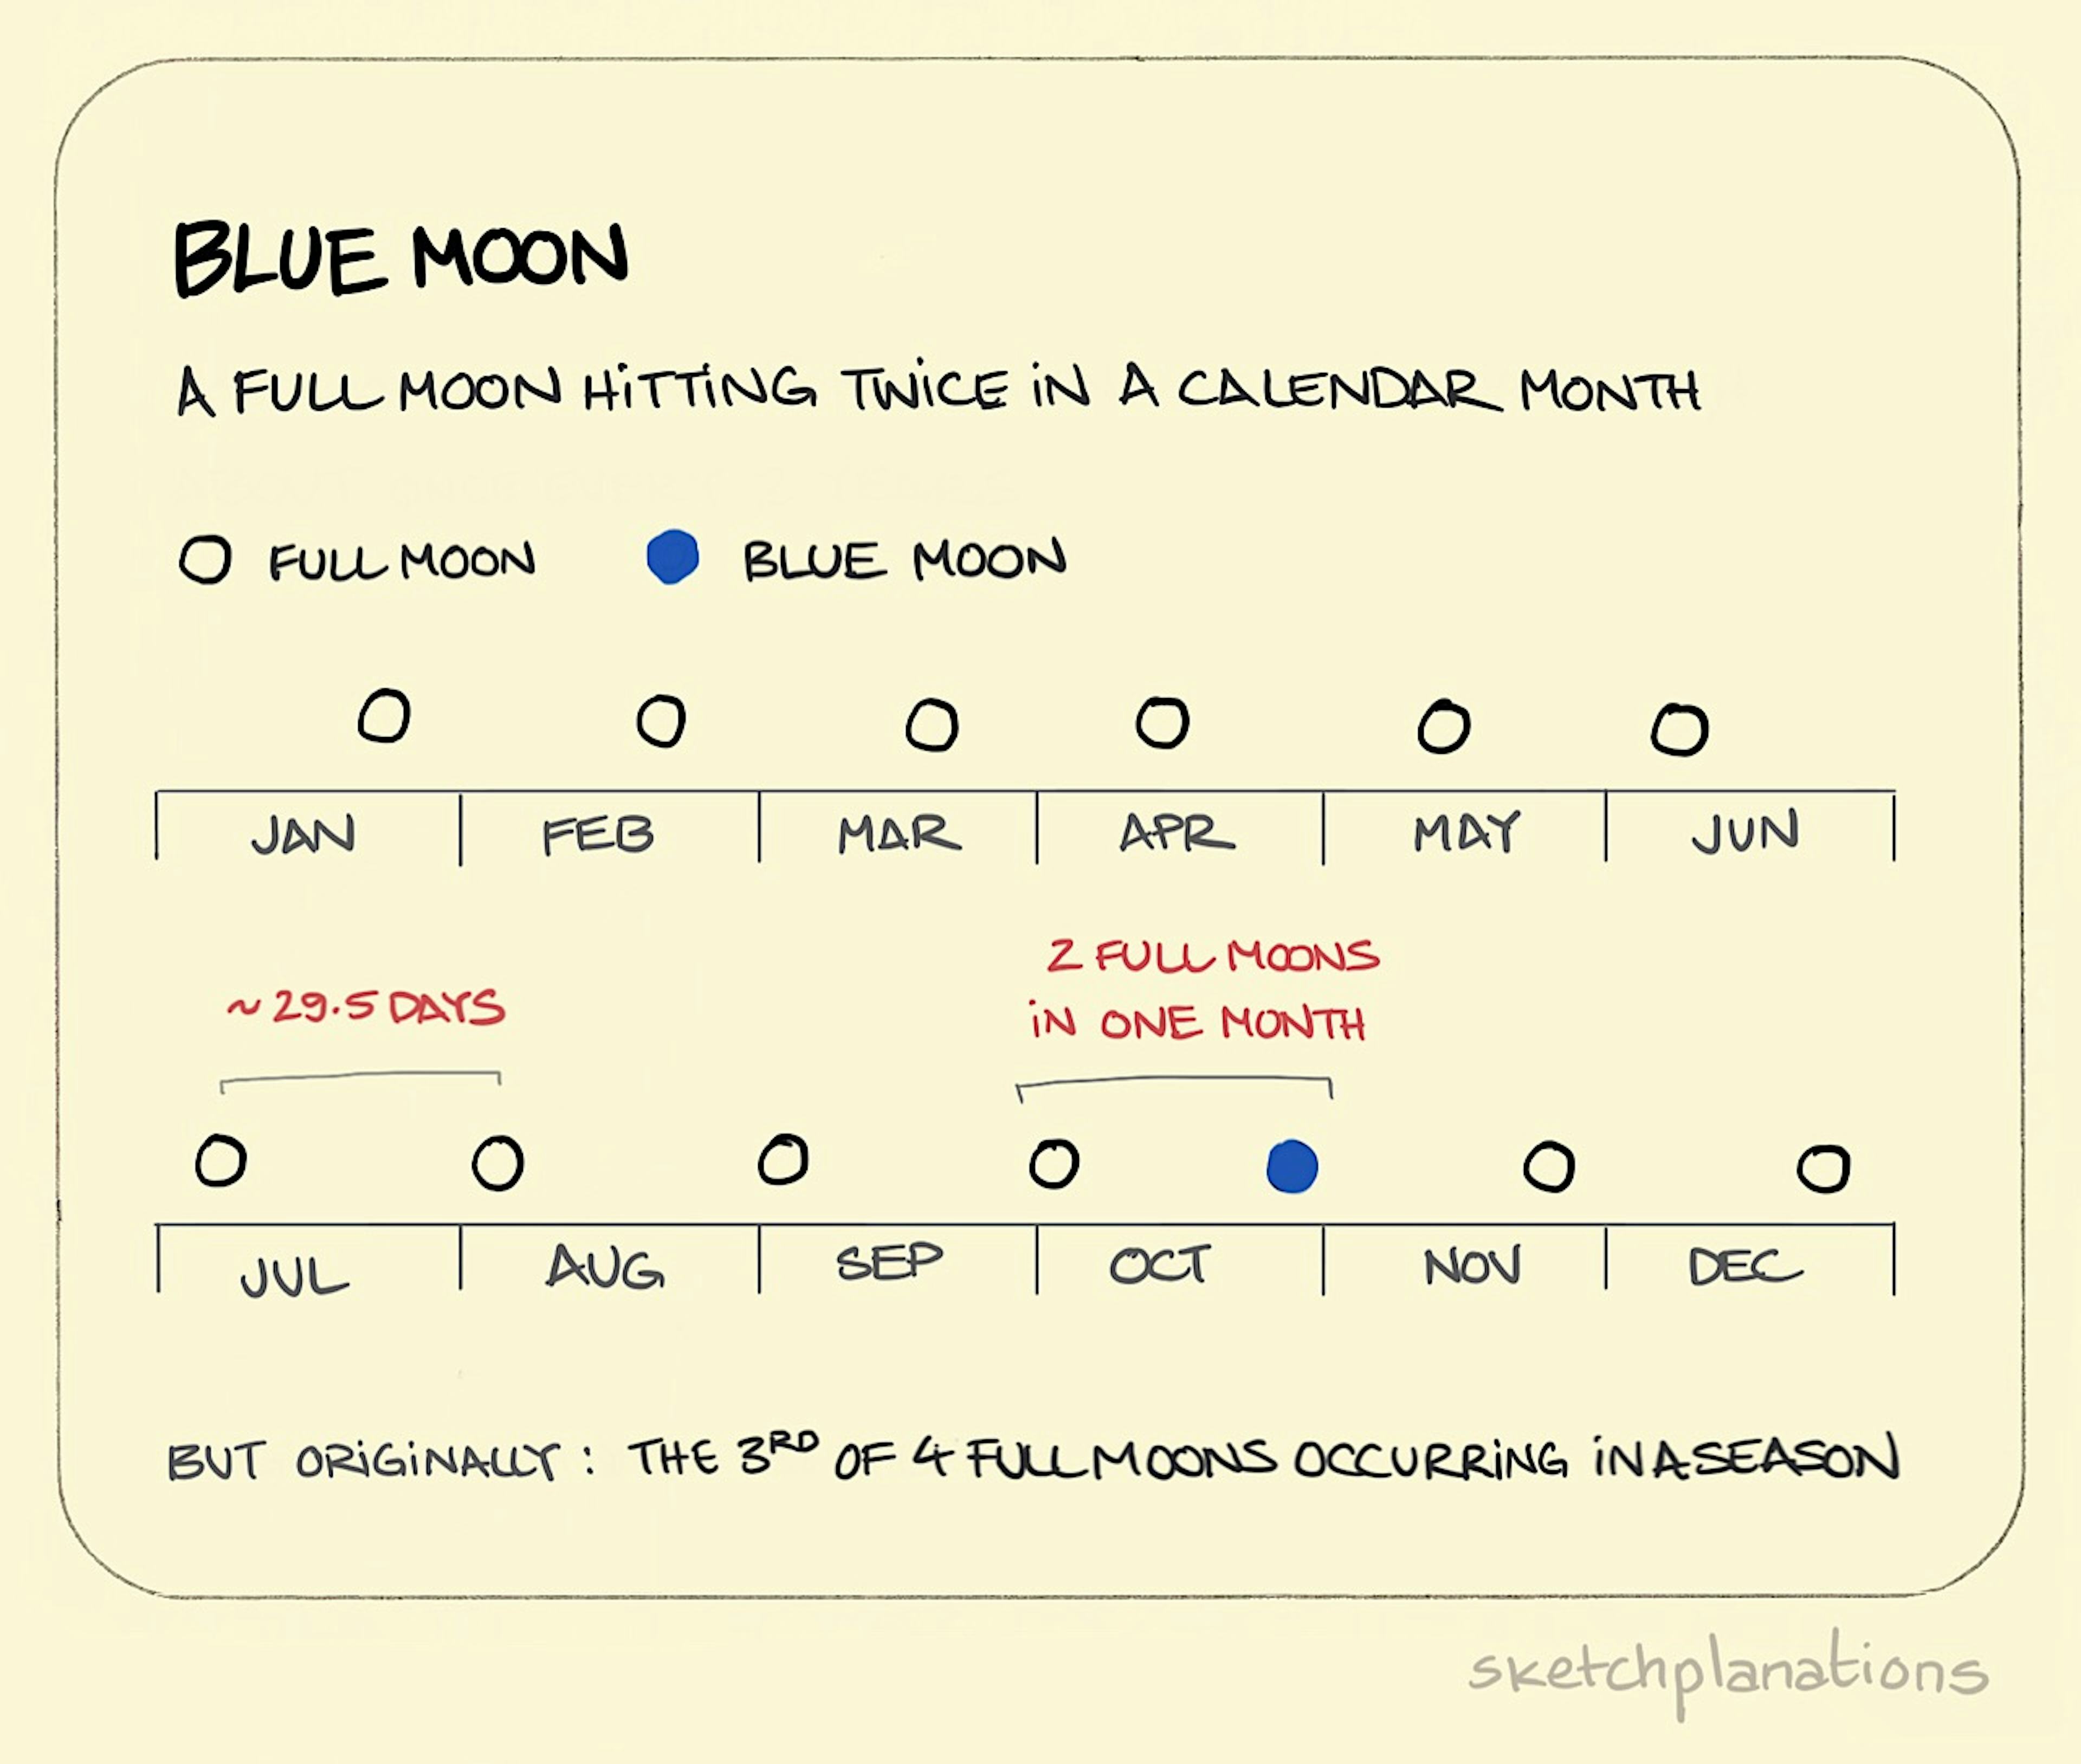 What is a blue Moon illustration: on a year-long timeline, the occurrence of full moons is plotted for each month. A blue moon is when a full moon occurs twice in the same month - once at the beginning and again at the end of the month. 